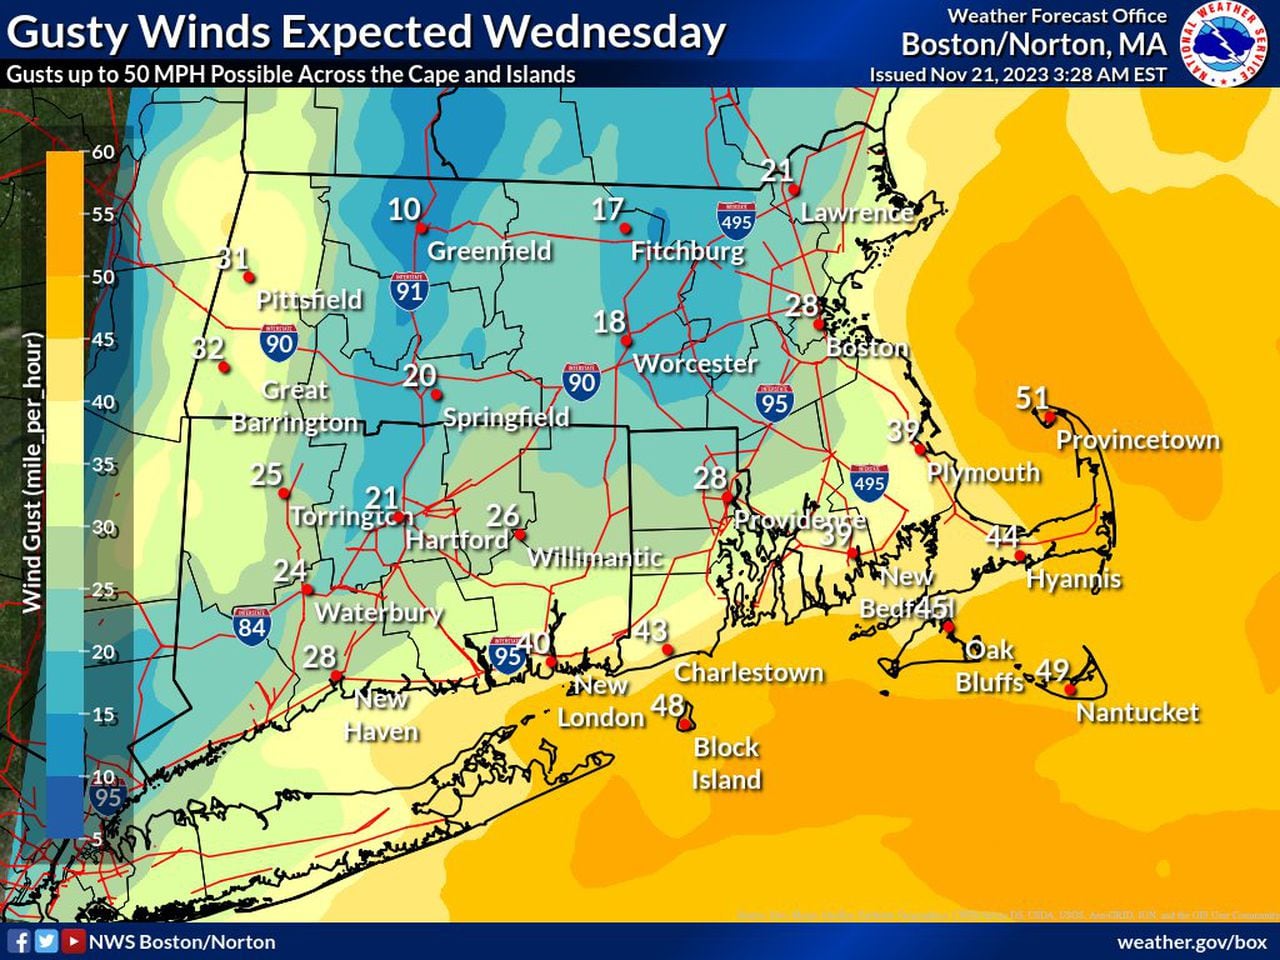 MA - Gusty winds expected Wednesday